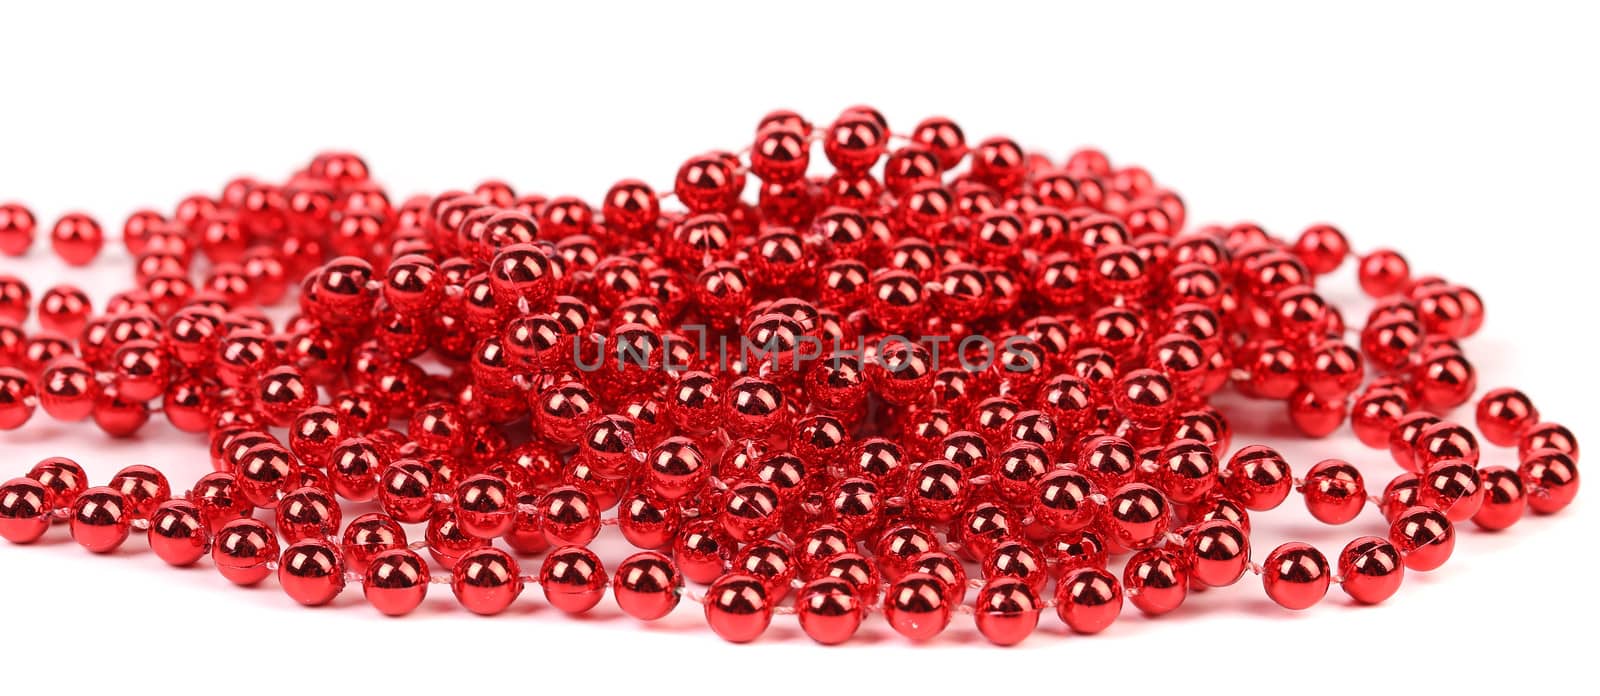 Christmas garland of small red beads. Isolated on white background.